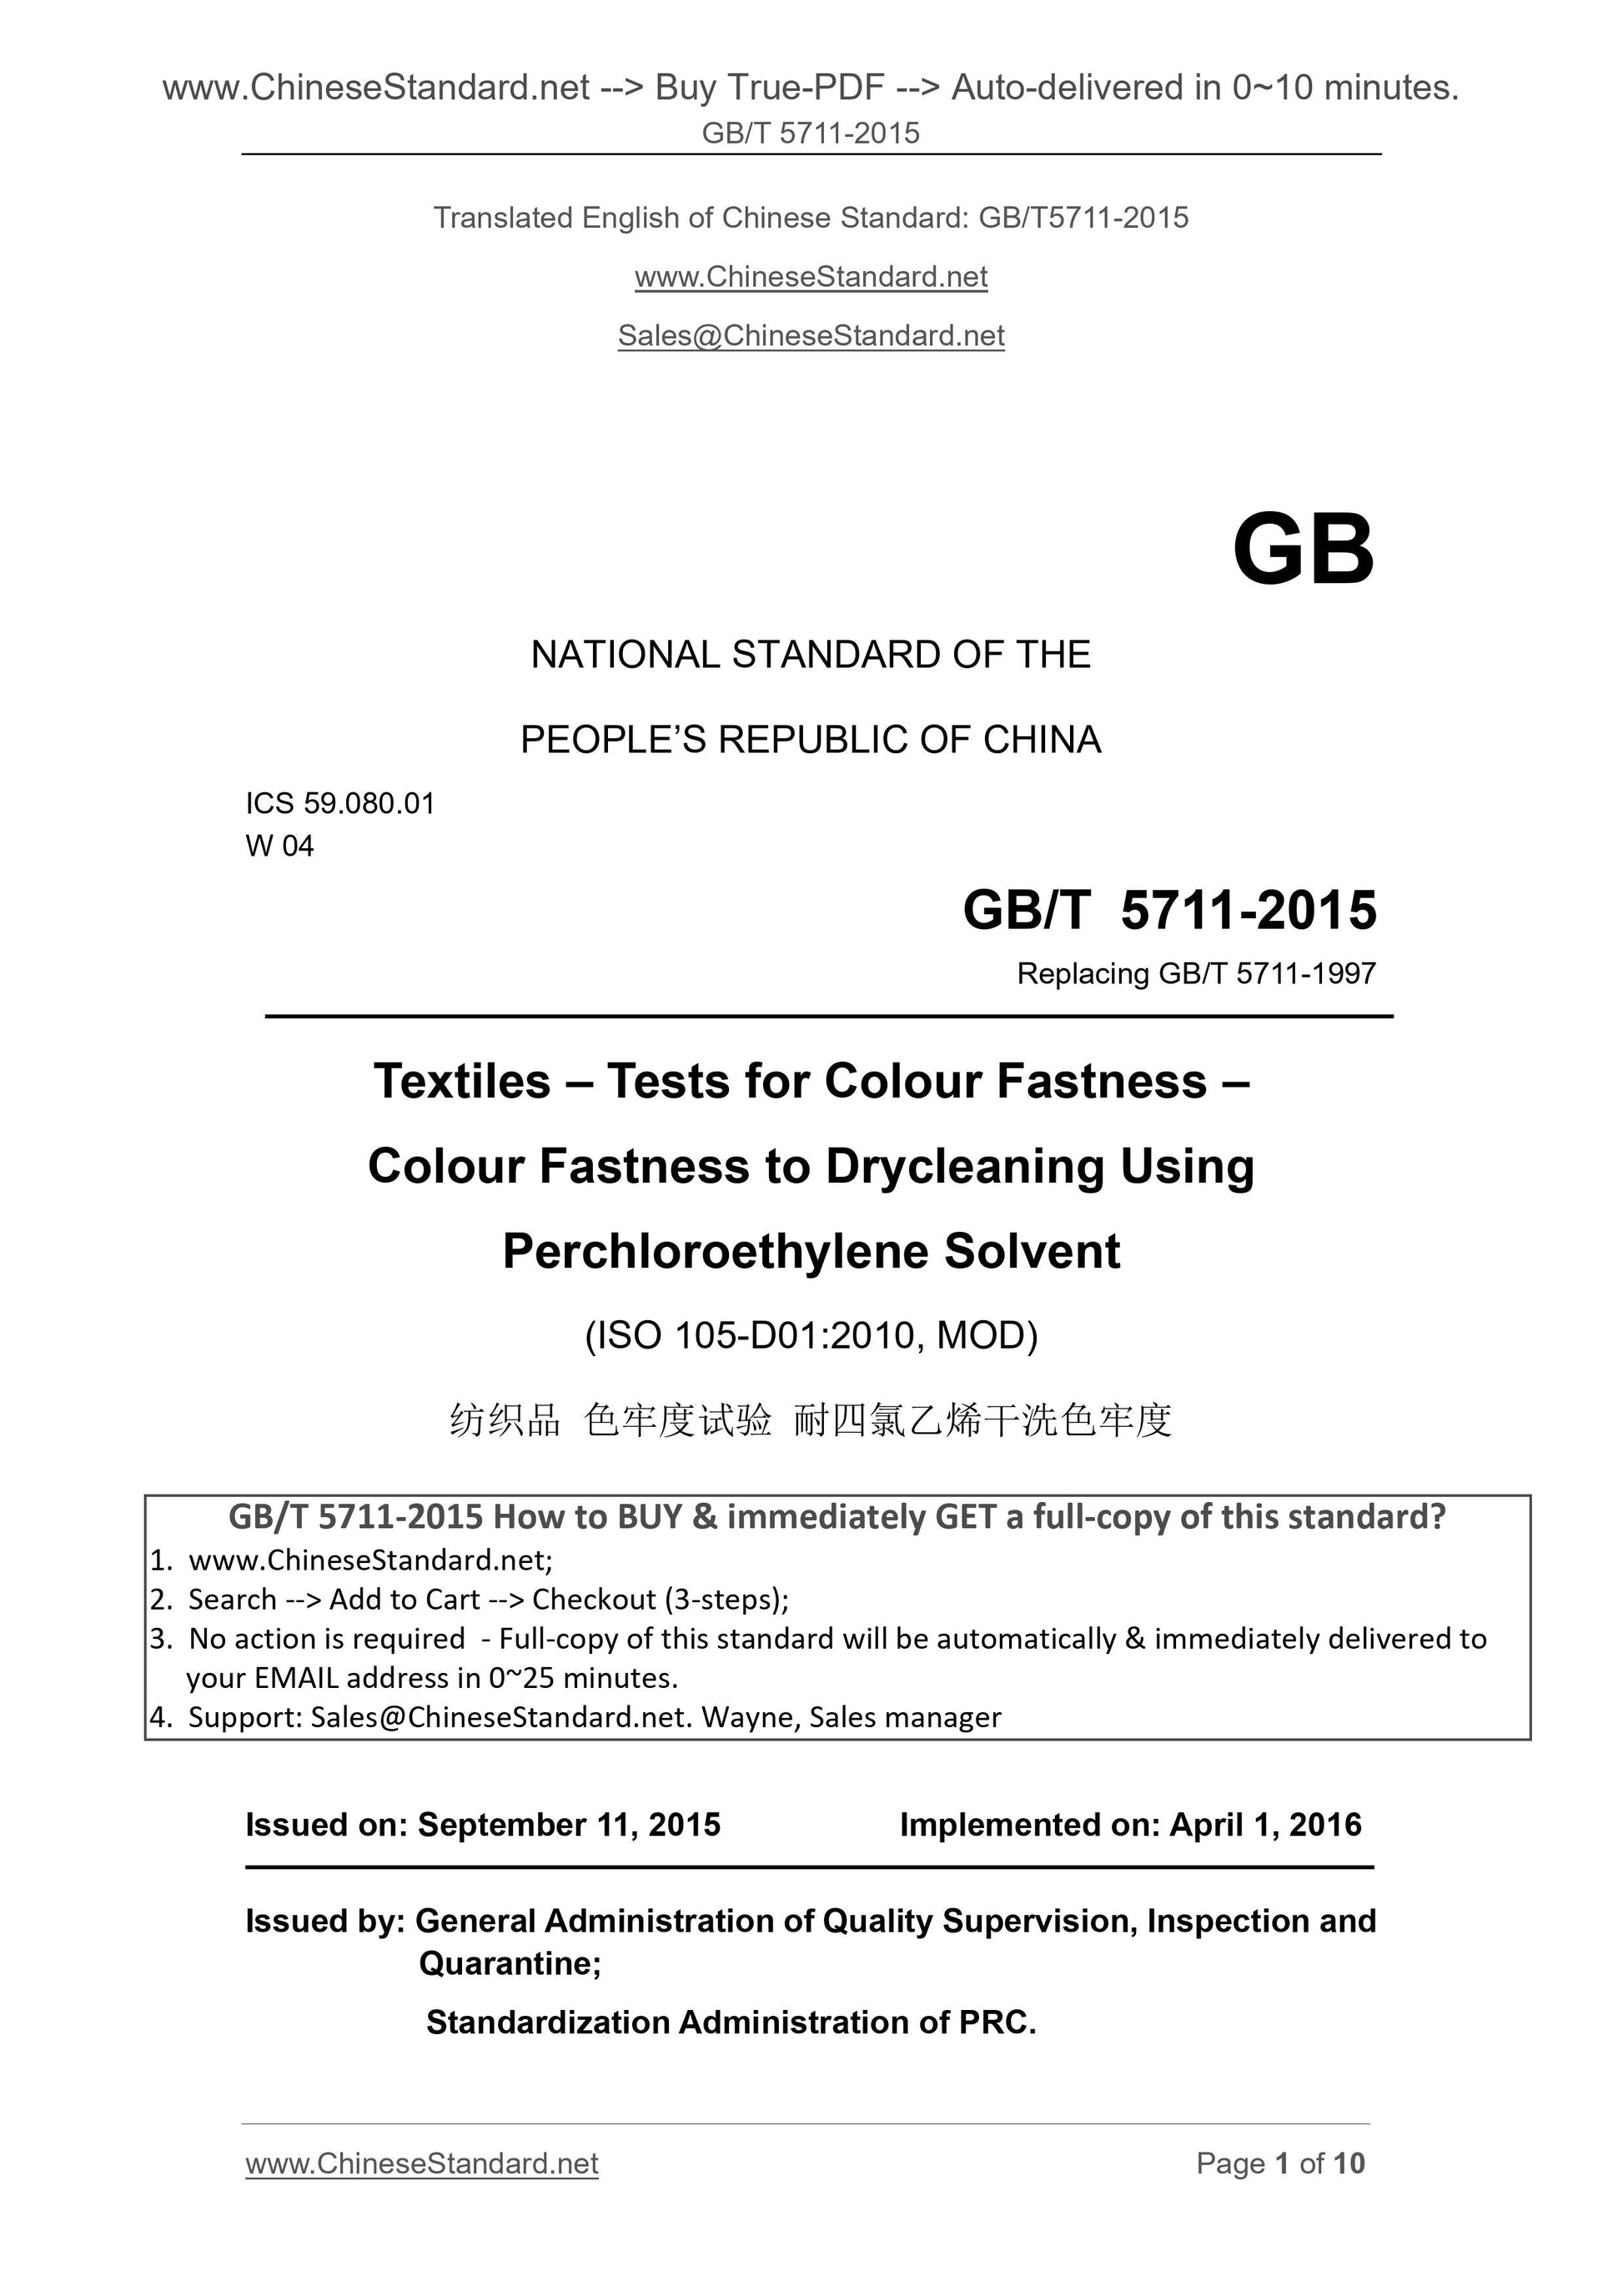 GB/T 5711-2015 Page 1